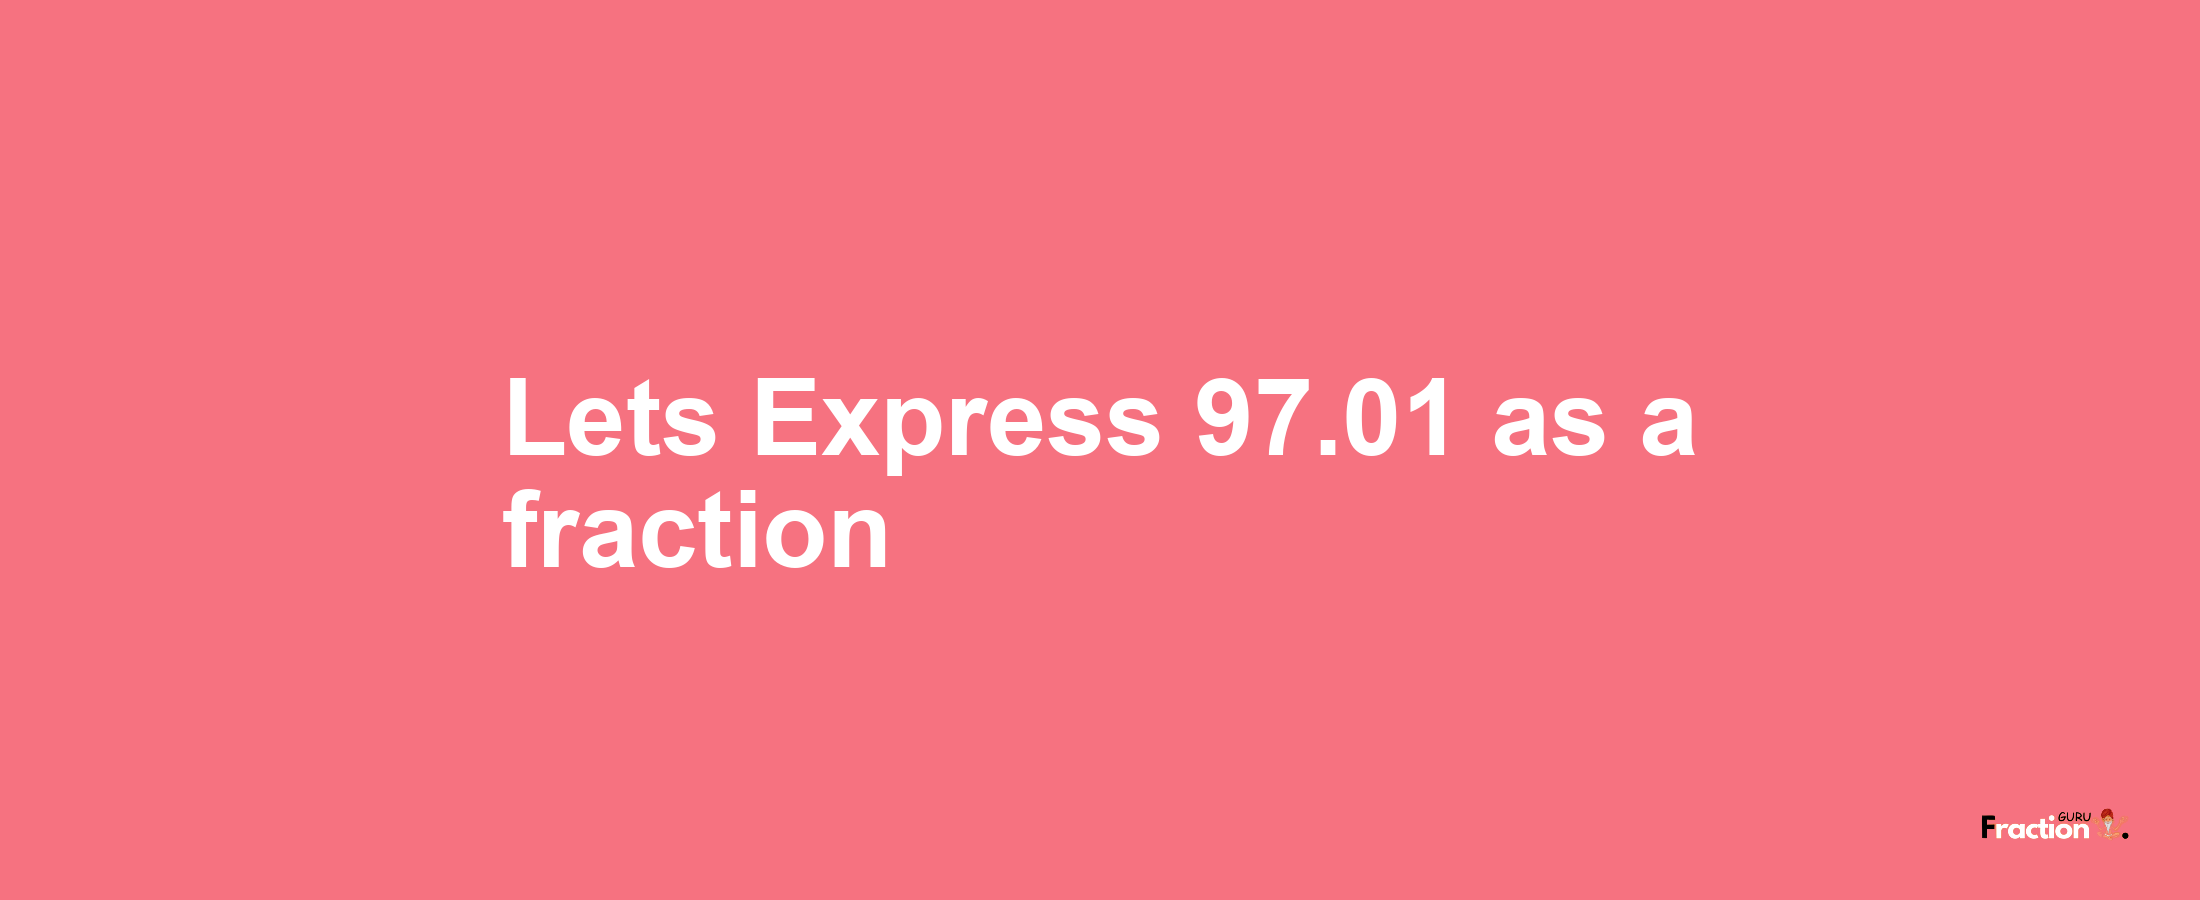 Lets Express 97.01 as afraction